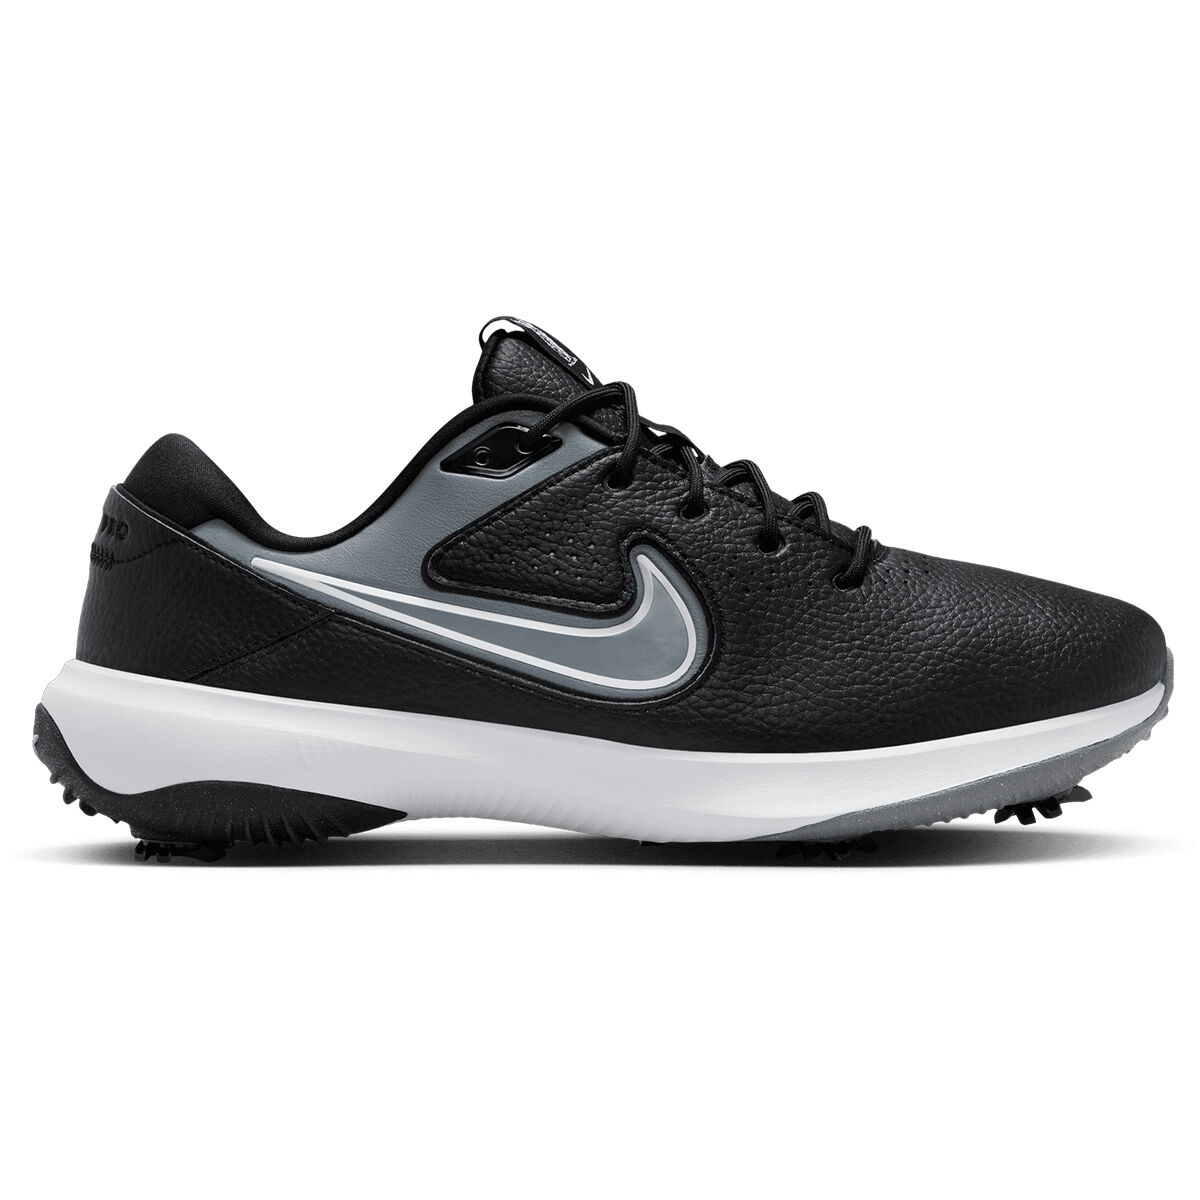 Nike Men’s Victory Pro 3 Waterproof Spiked Golf Shoes, Mens, Black/white/cool grey, 10 | American Golf